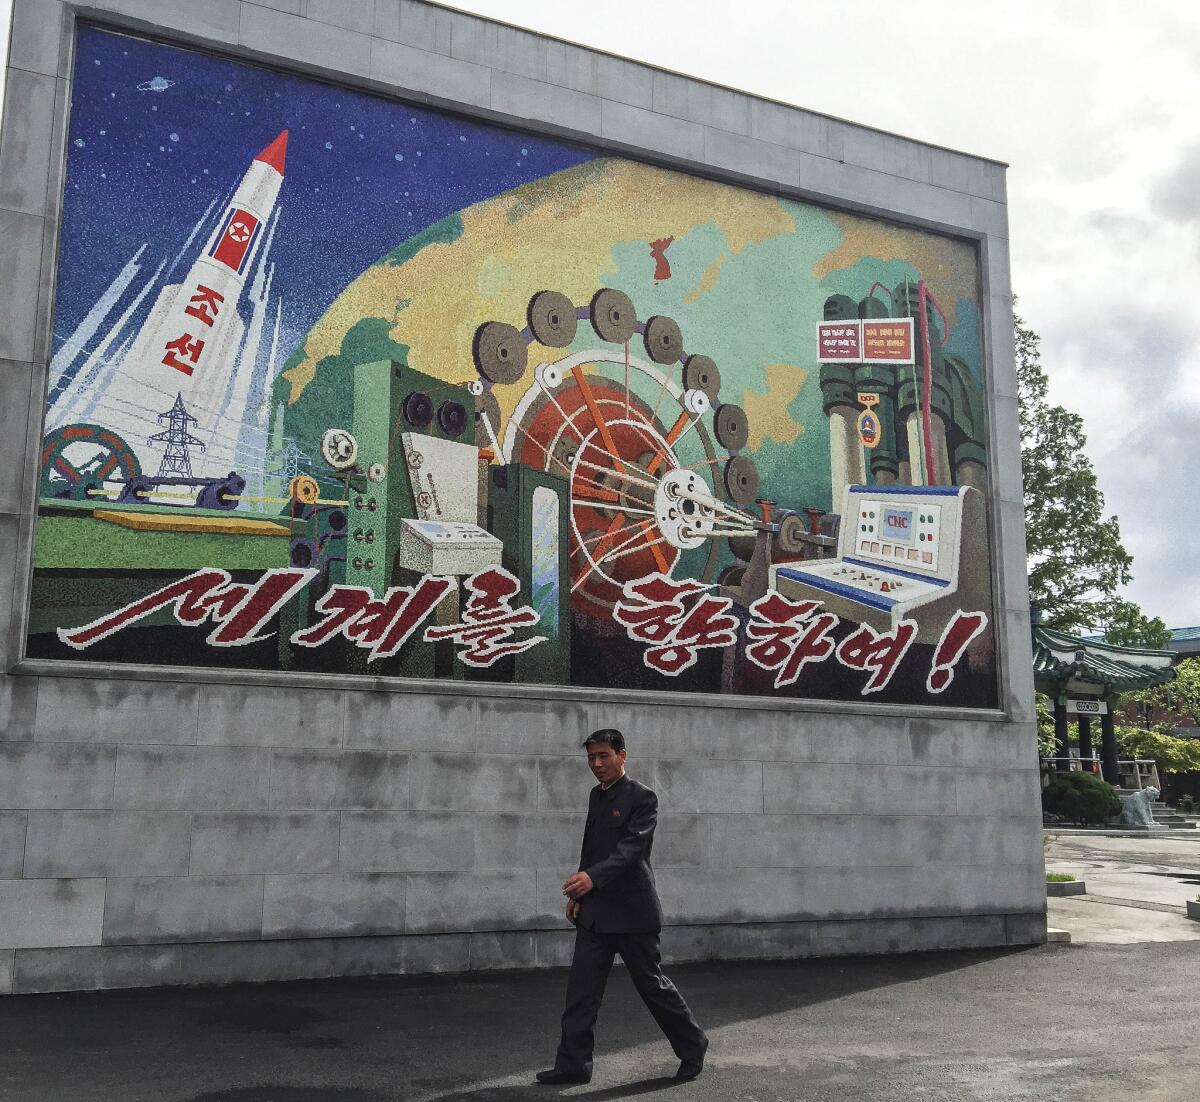 A mosaic outside the factory showcases North Korea’s rocket technology and industrial prowess. It says “Towards the world!” (Julie Makinen / Los Angeles Times)